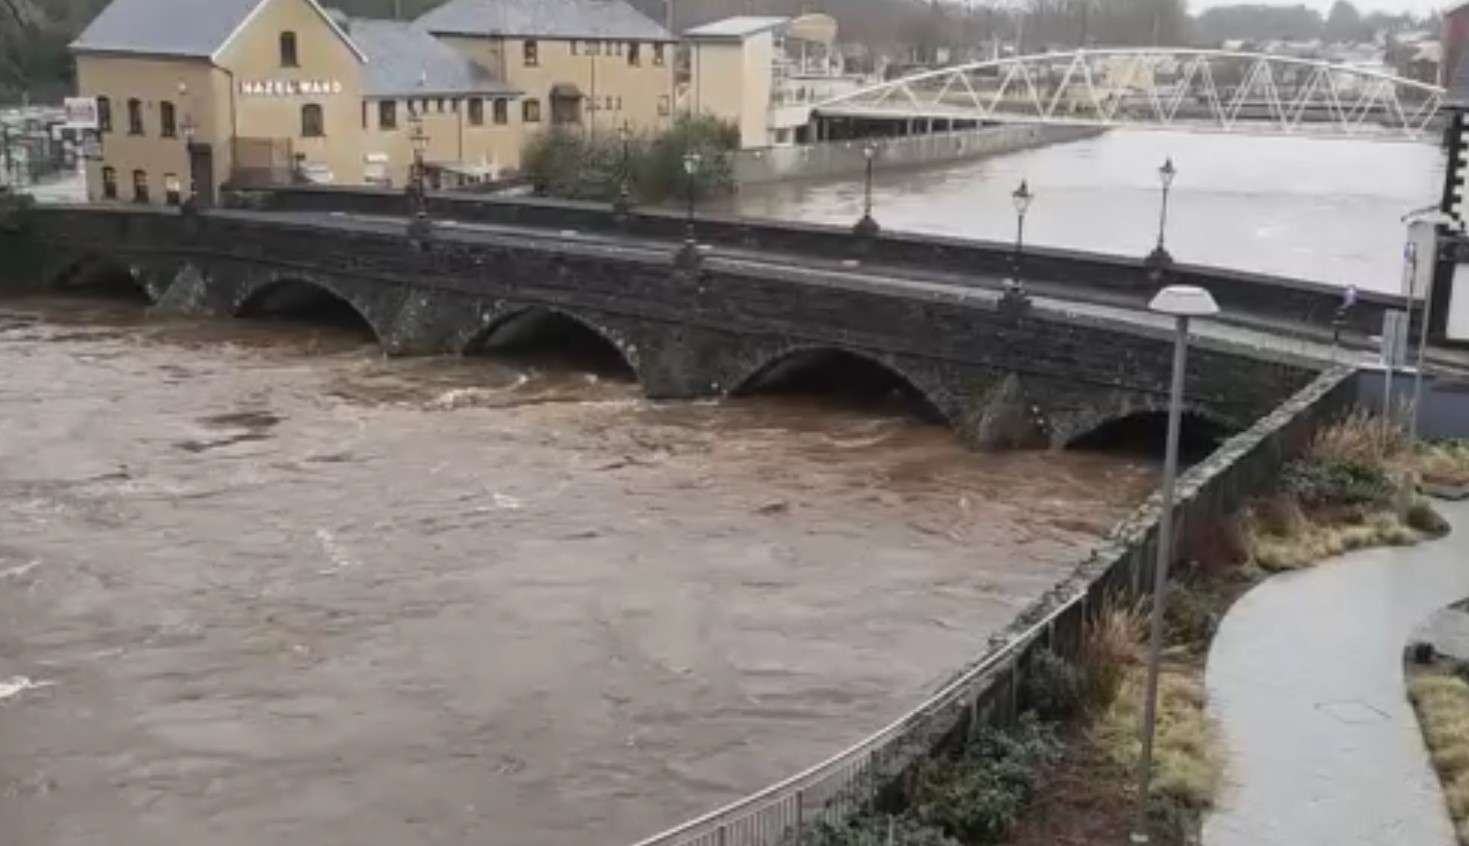 Video: Floods hit Tyrone as Storm Franklin approaches